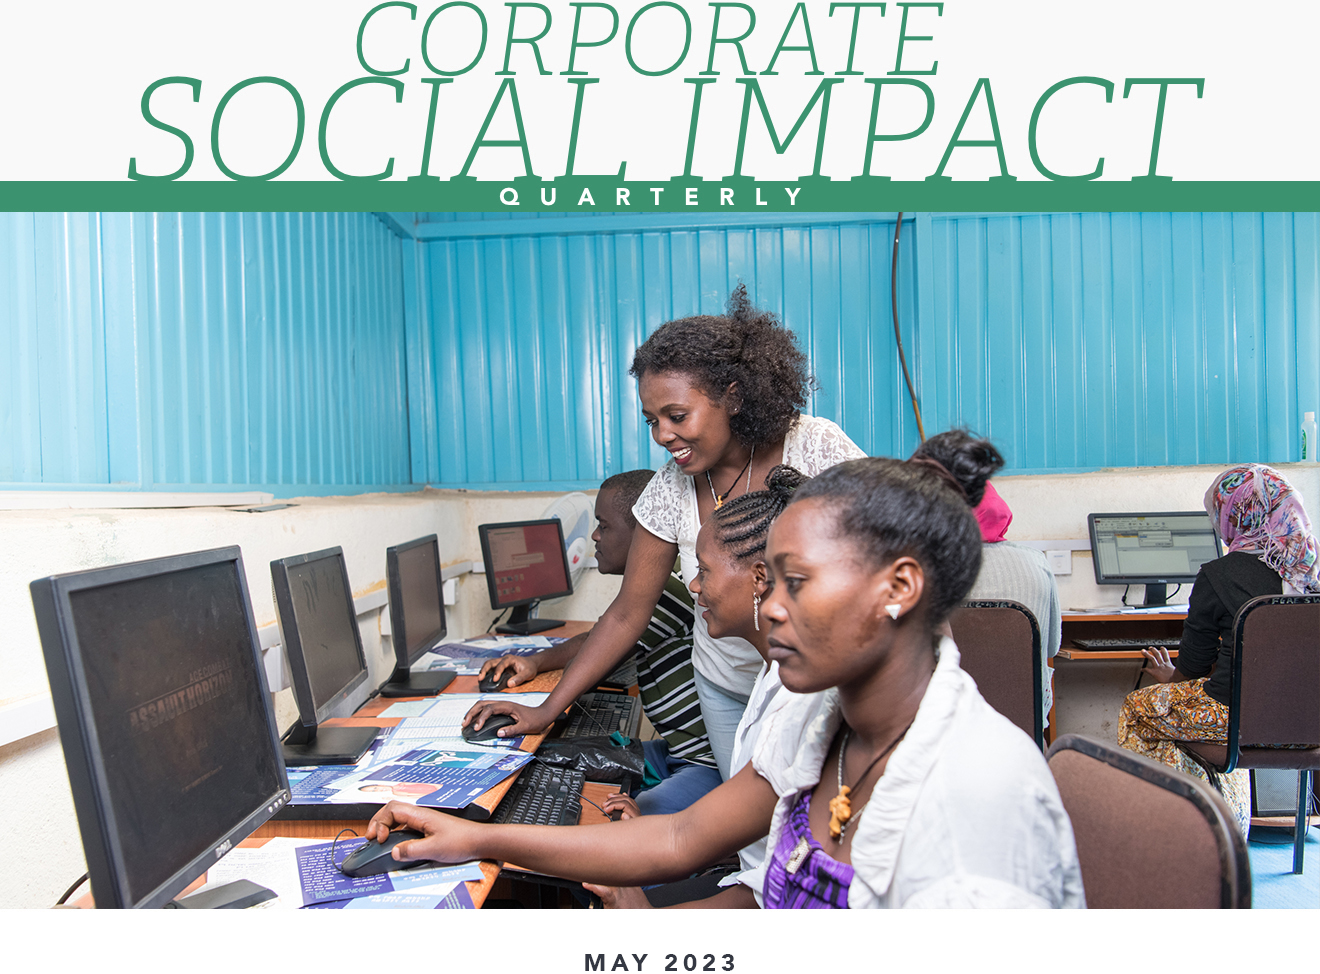 Corporate Social Impact Quarterly / May 2023. A technology classroom in Ethiopia. 